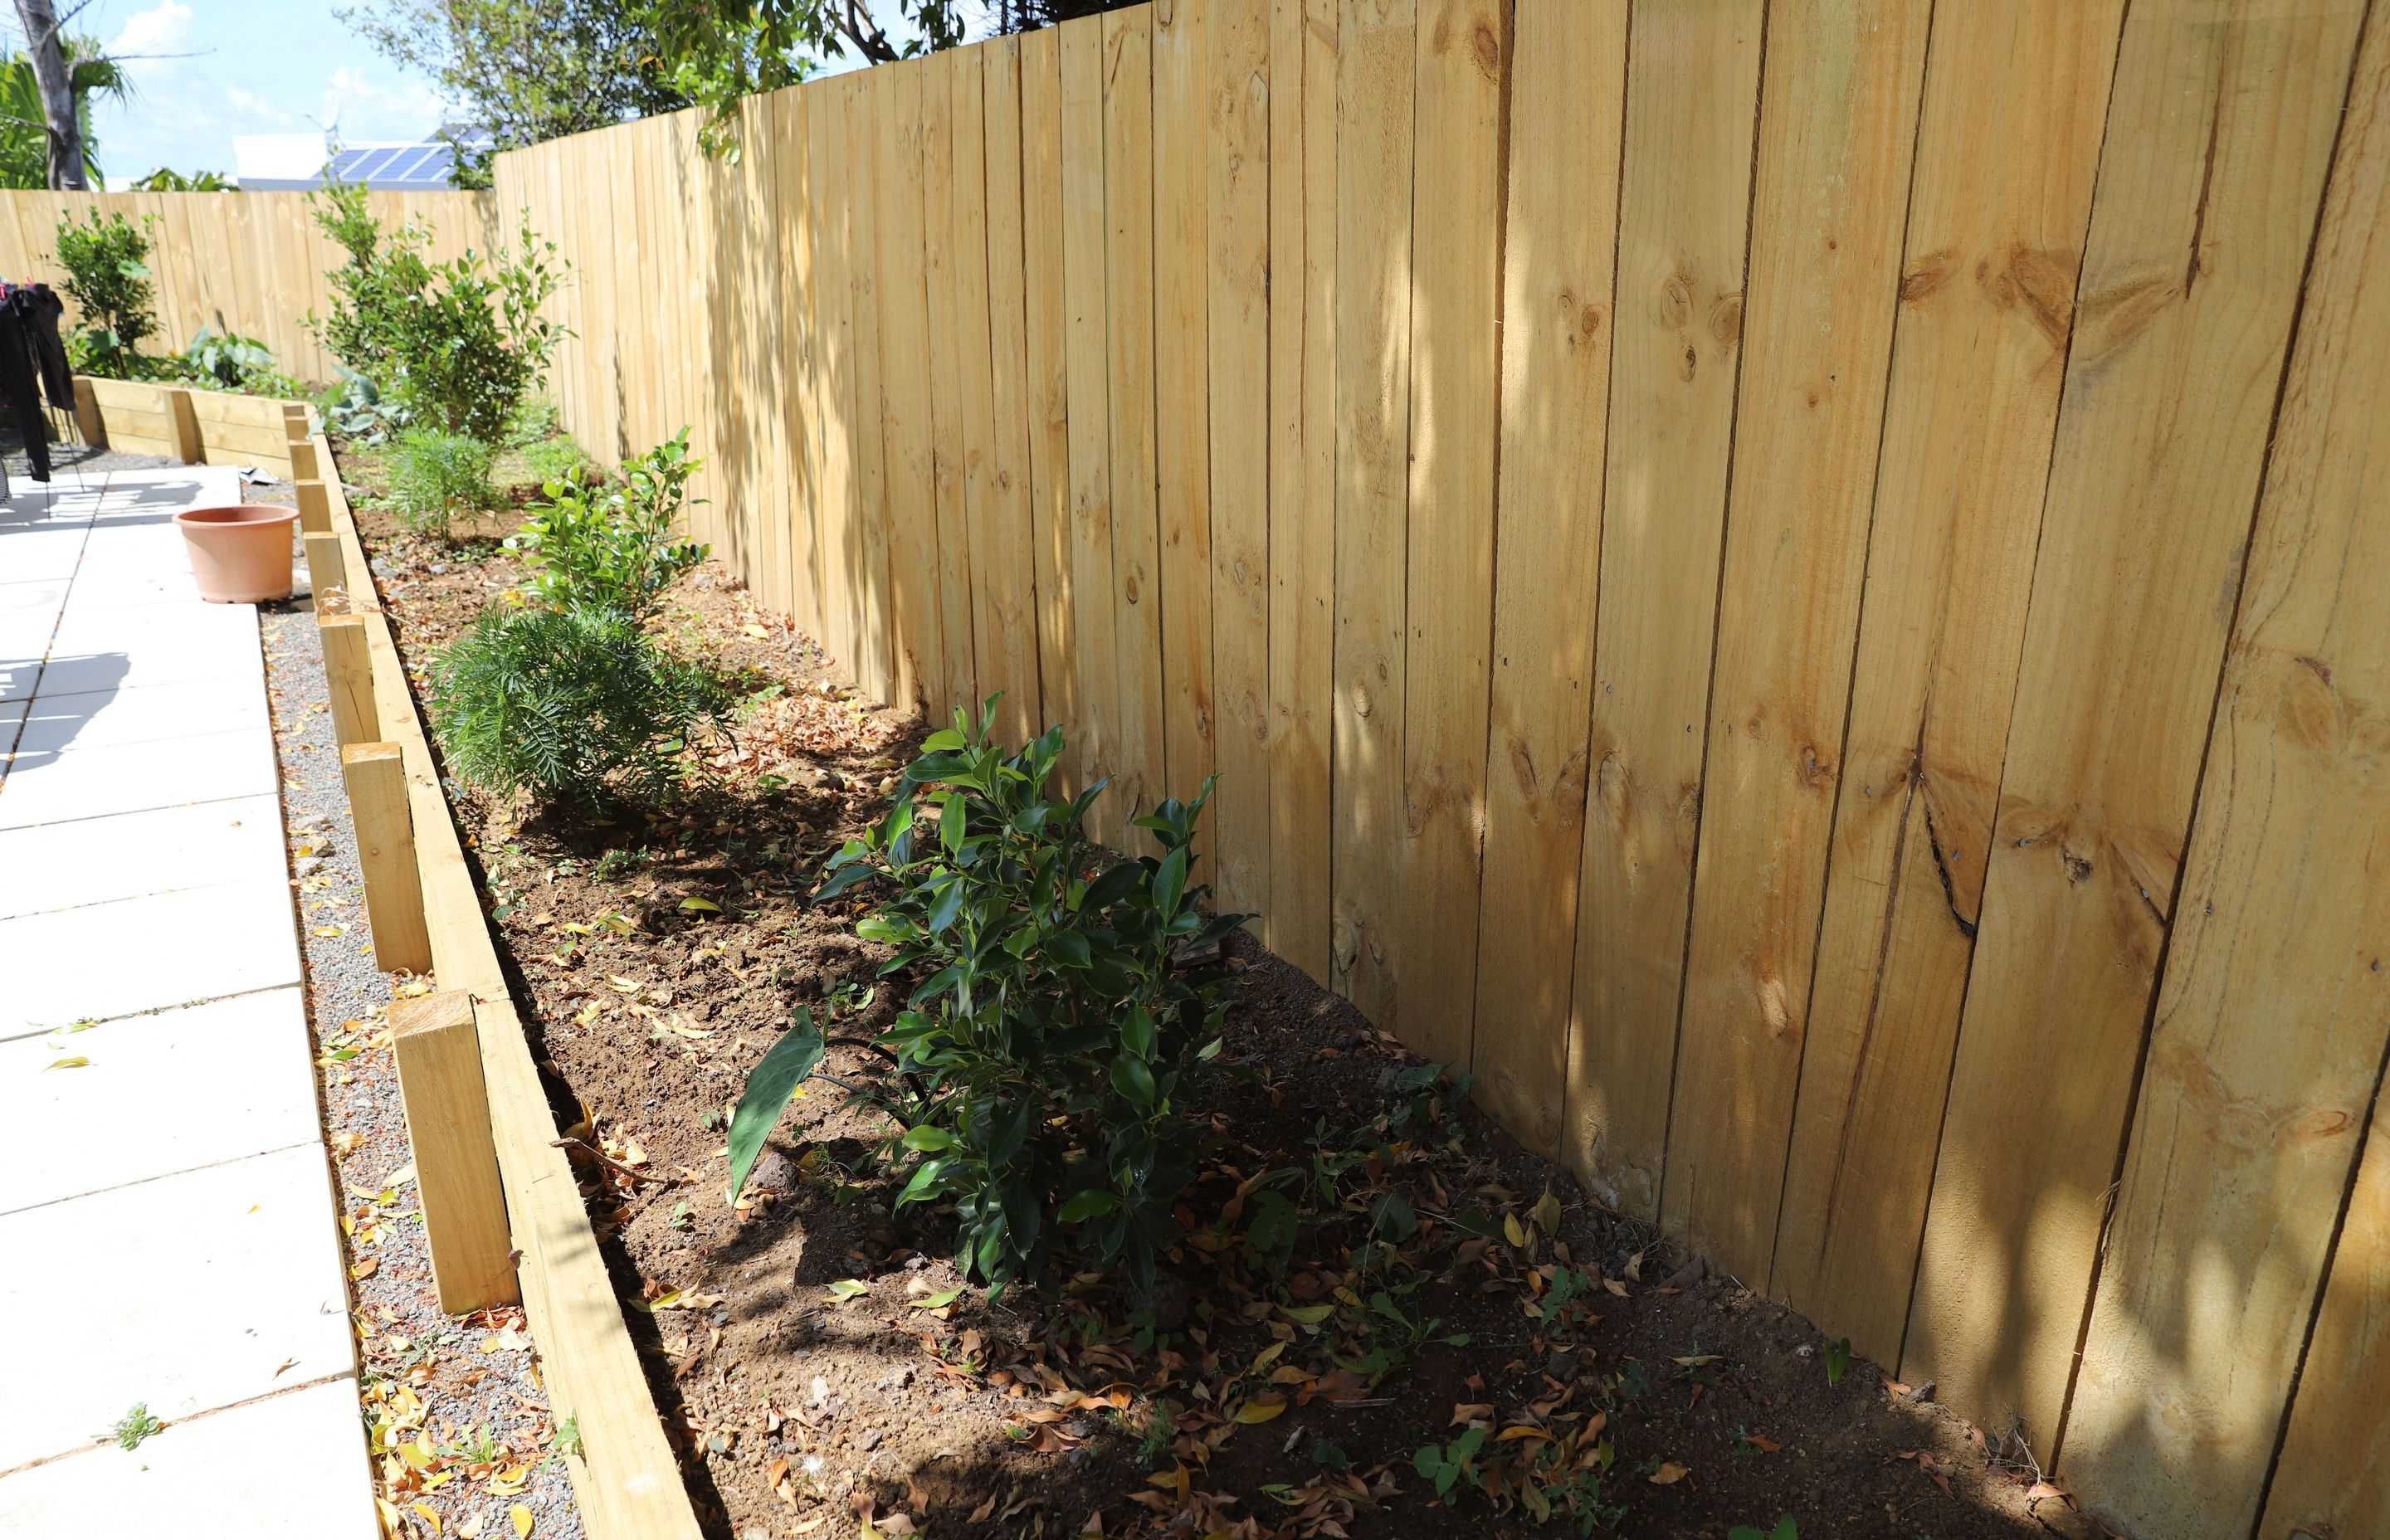 The vegetable garden surrounds the concrete patio with Timber fencing throughout.